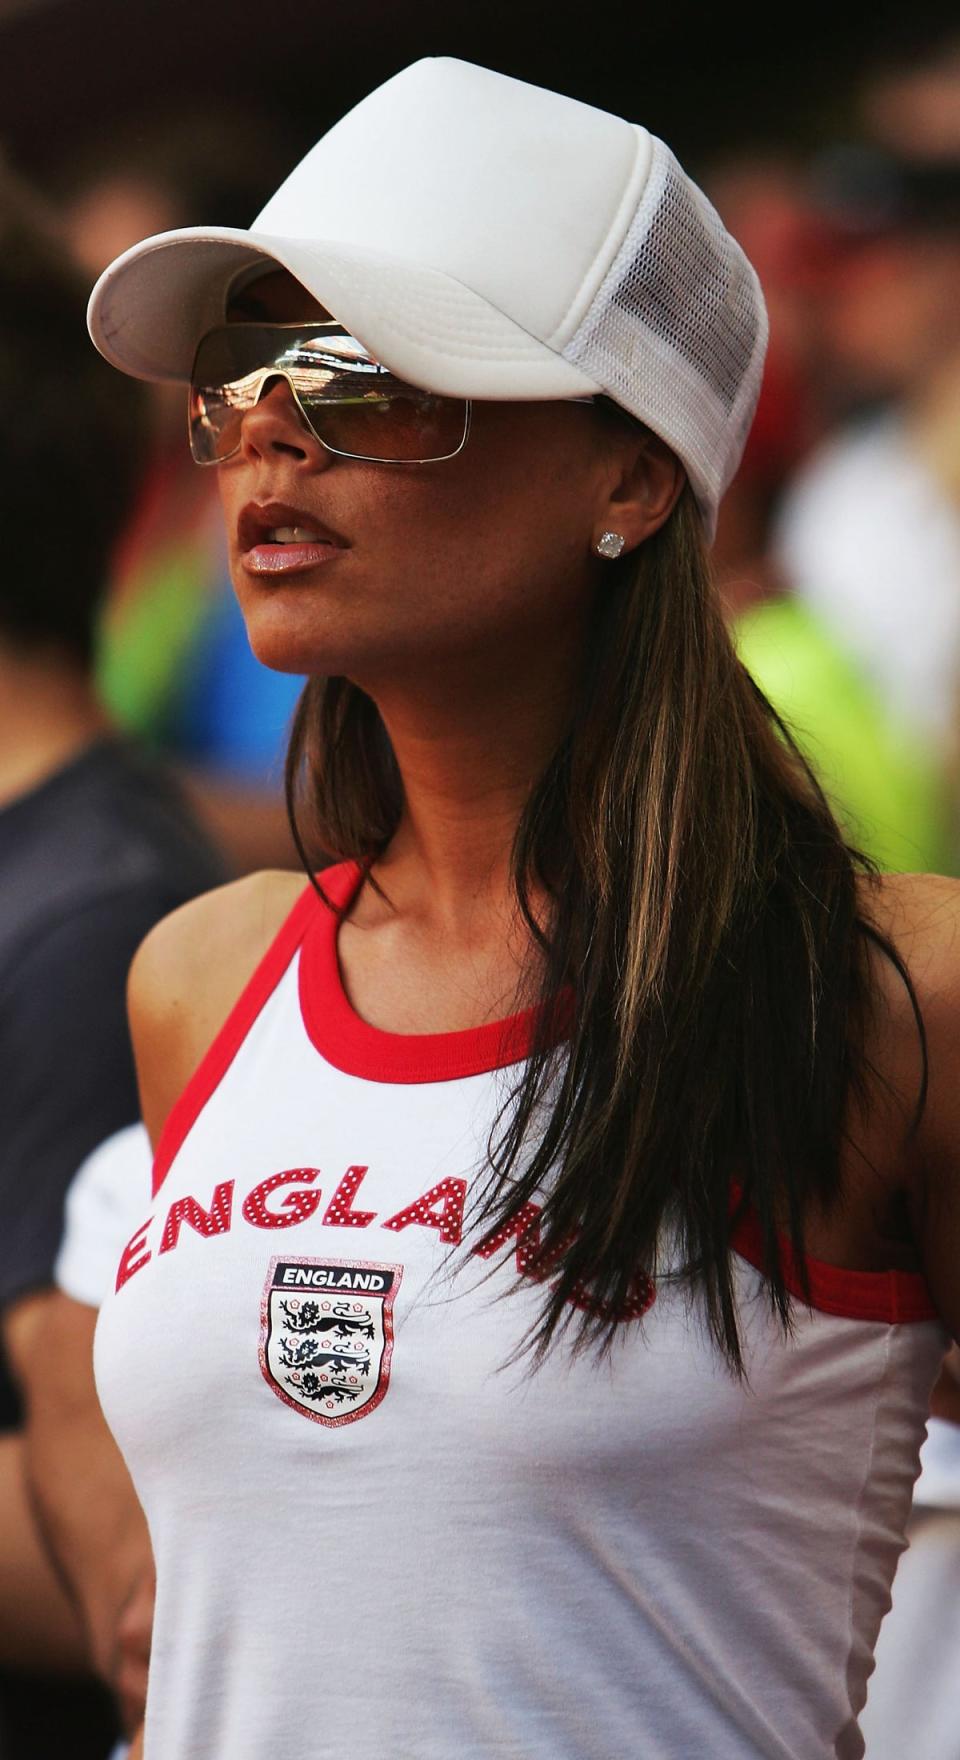 At the UEFA Euro 2004 in Portugal on June 24, 2004 (Getty Images)